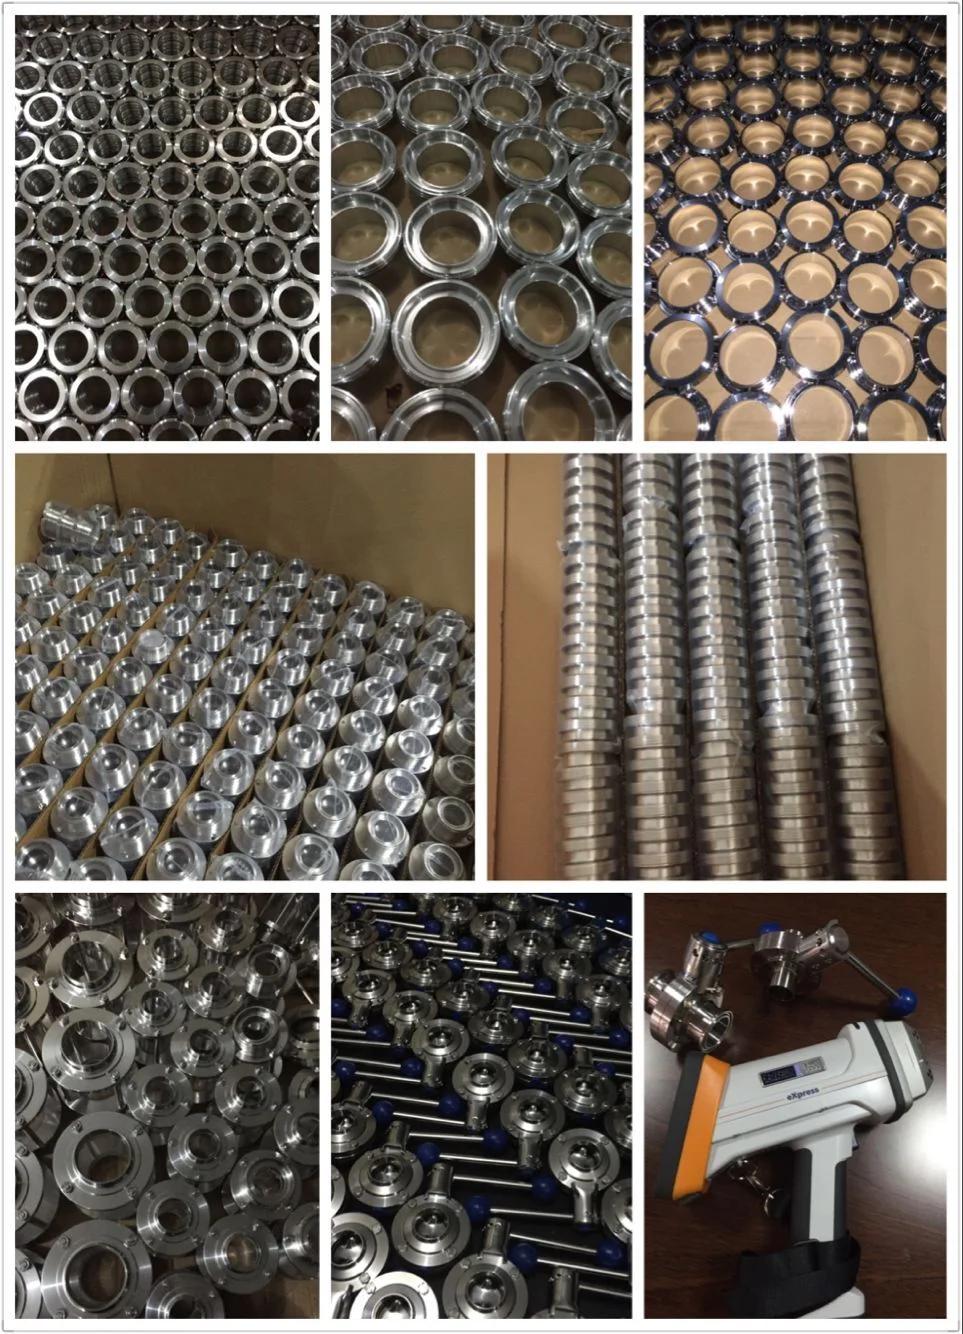 Sanitary Stainless Steel 90 Degree Filter with Clamp End